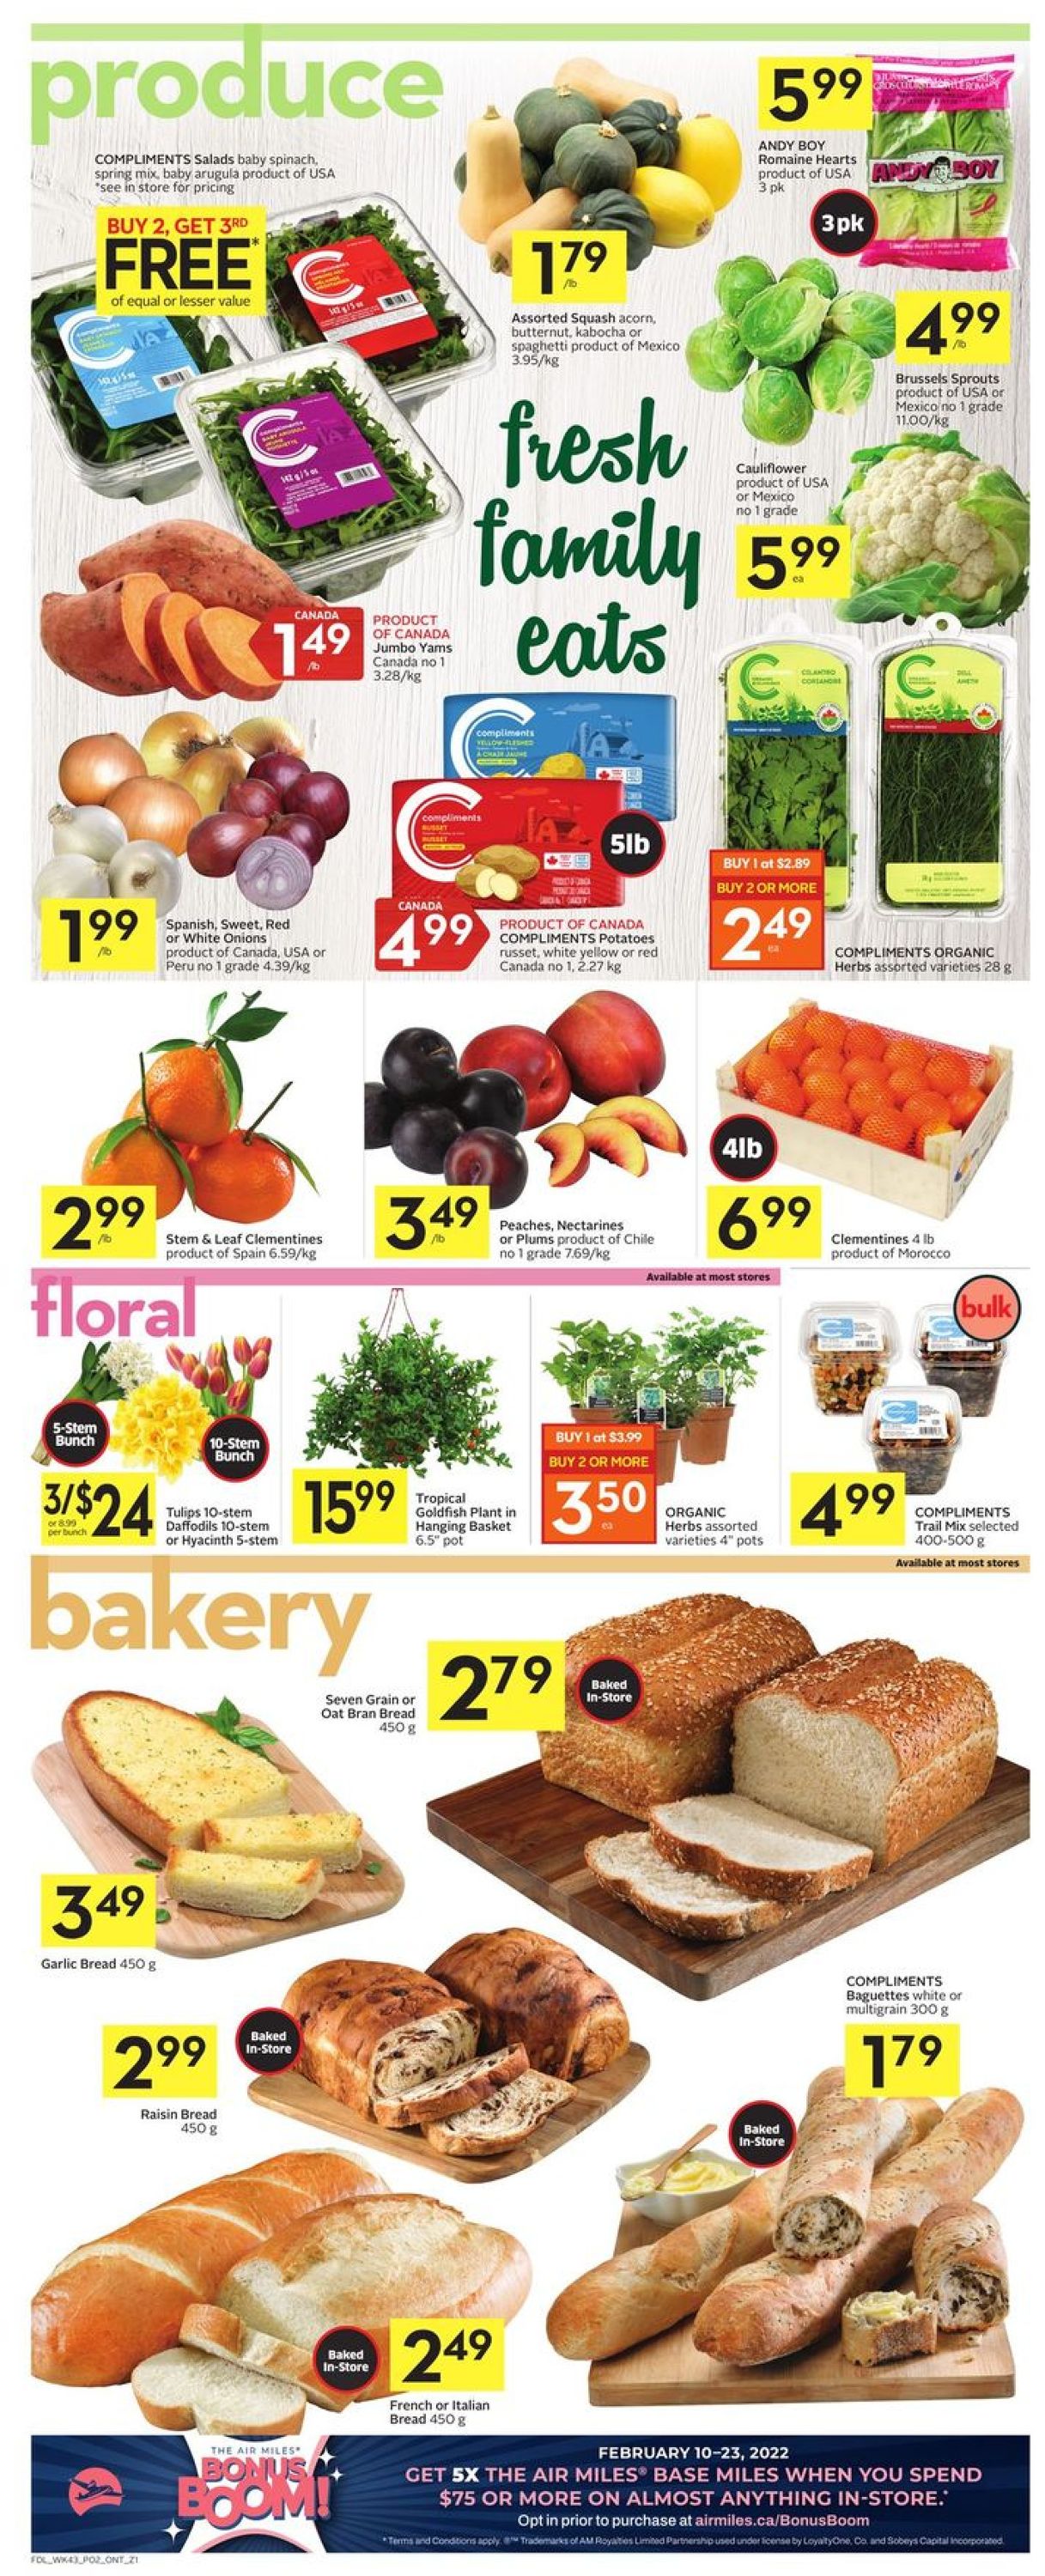 Foodland Flyer from 02/17/2022